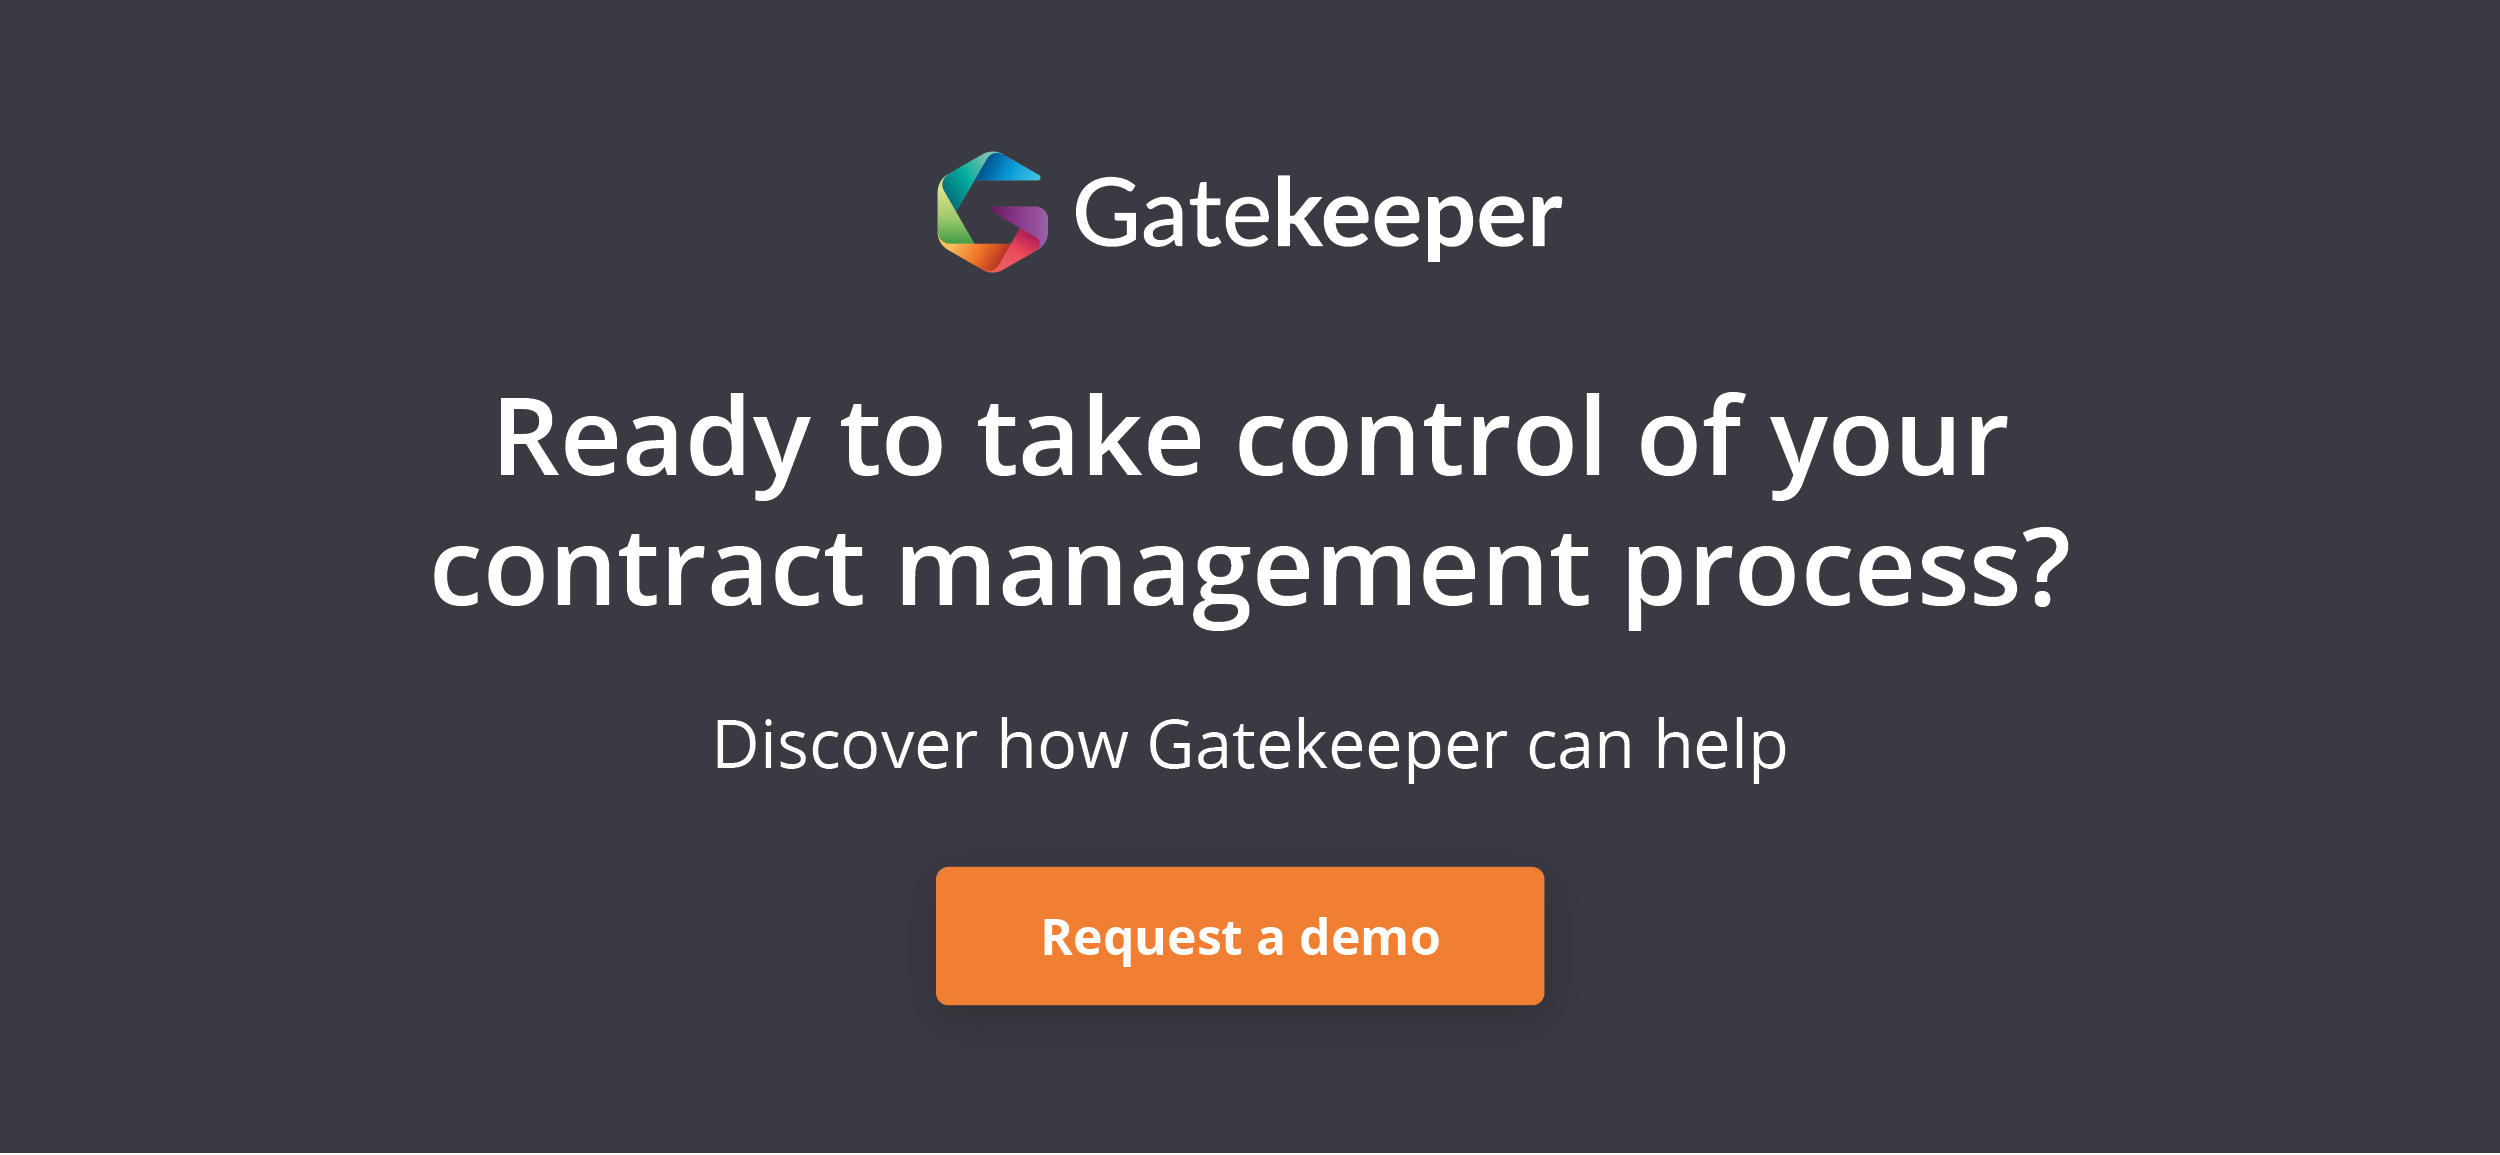 Improve your contract management process